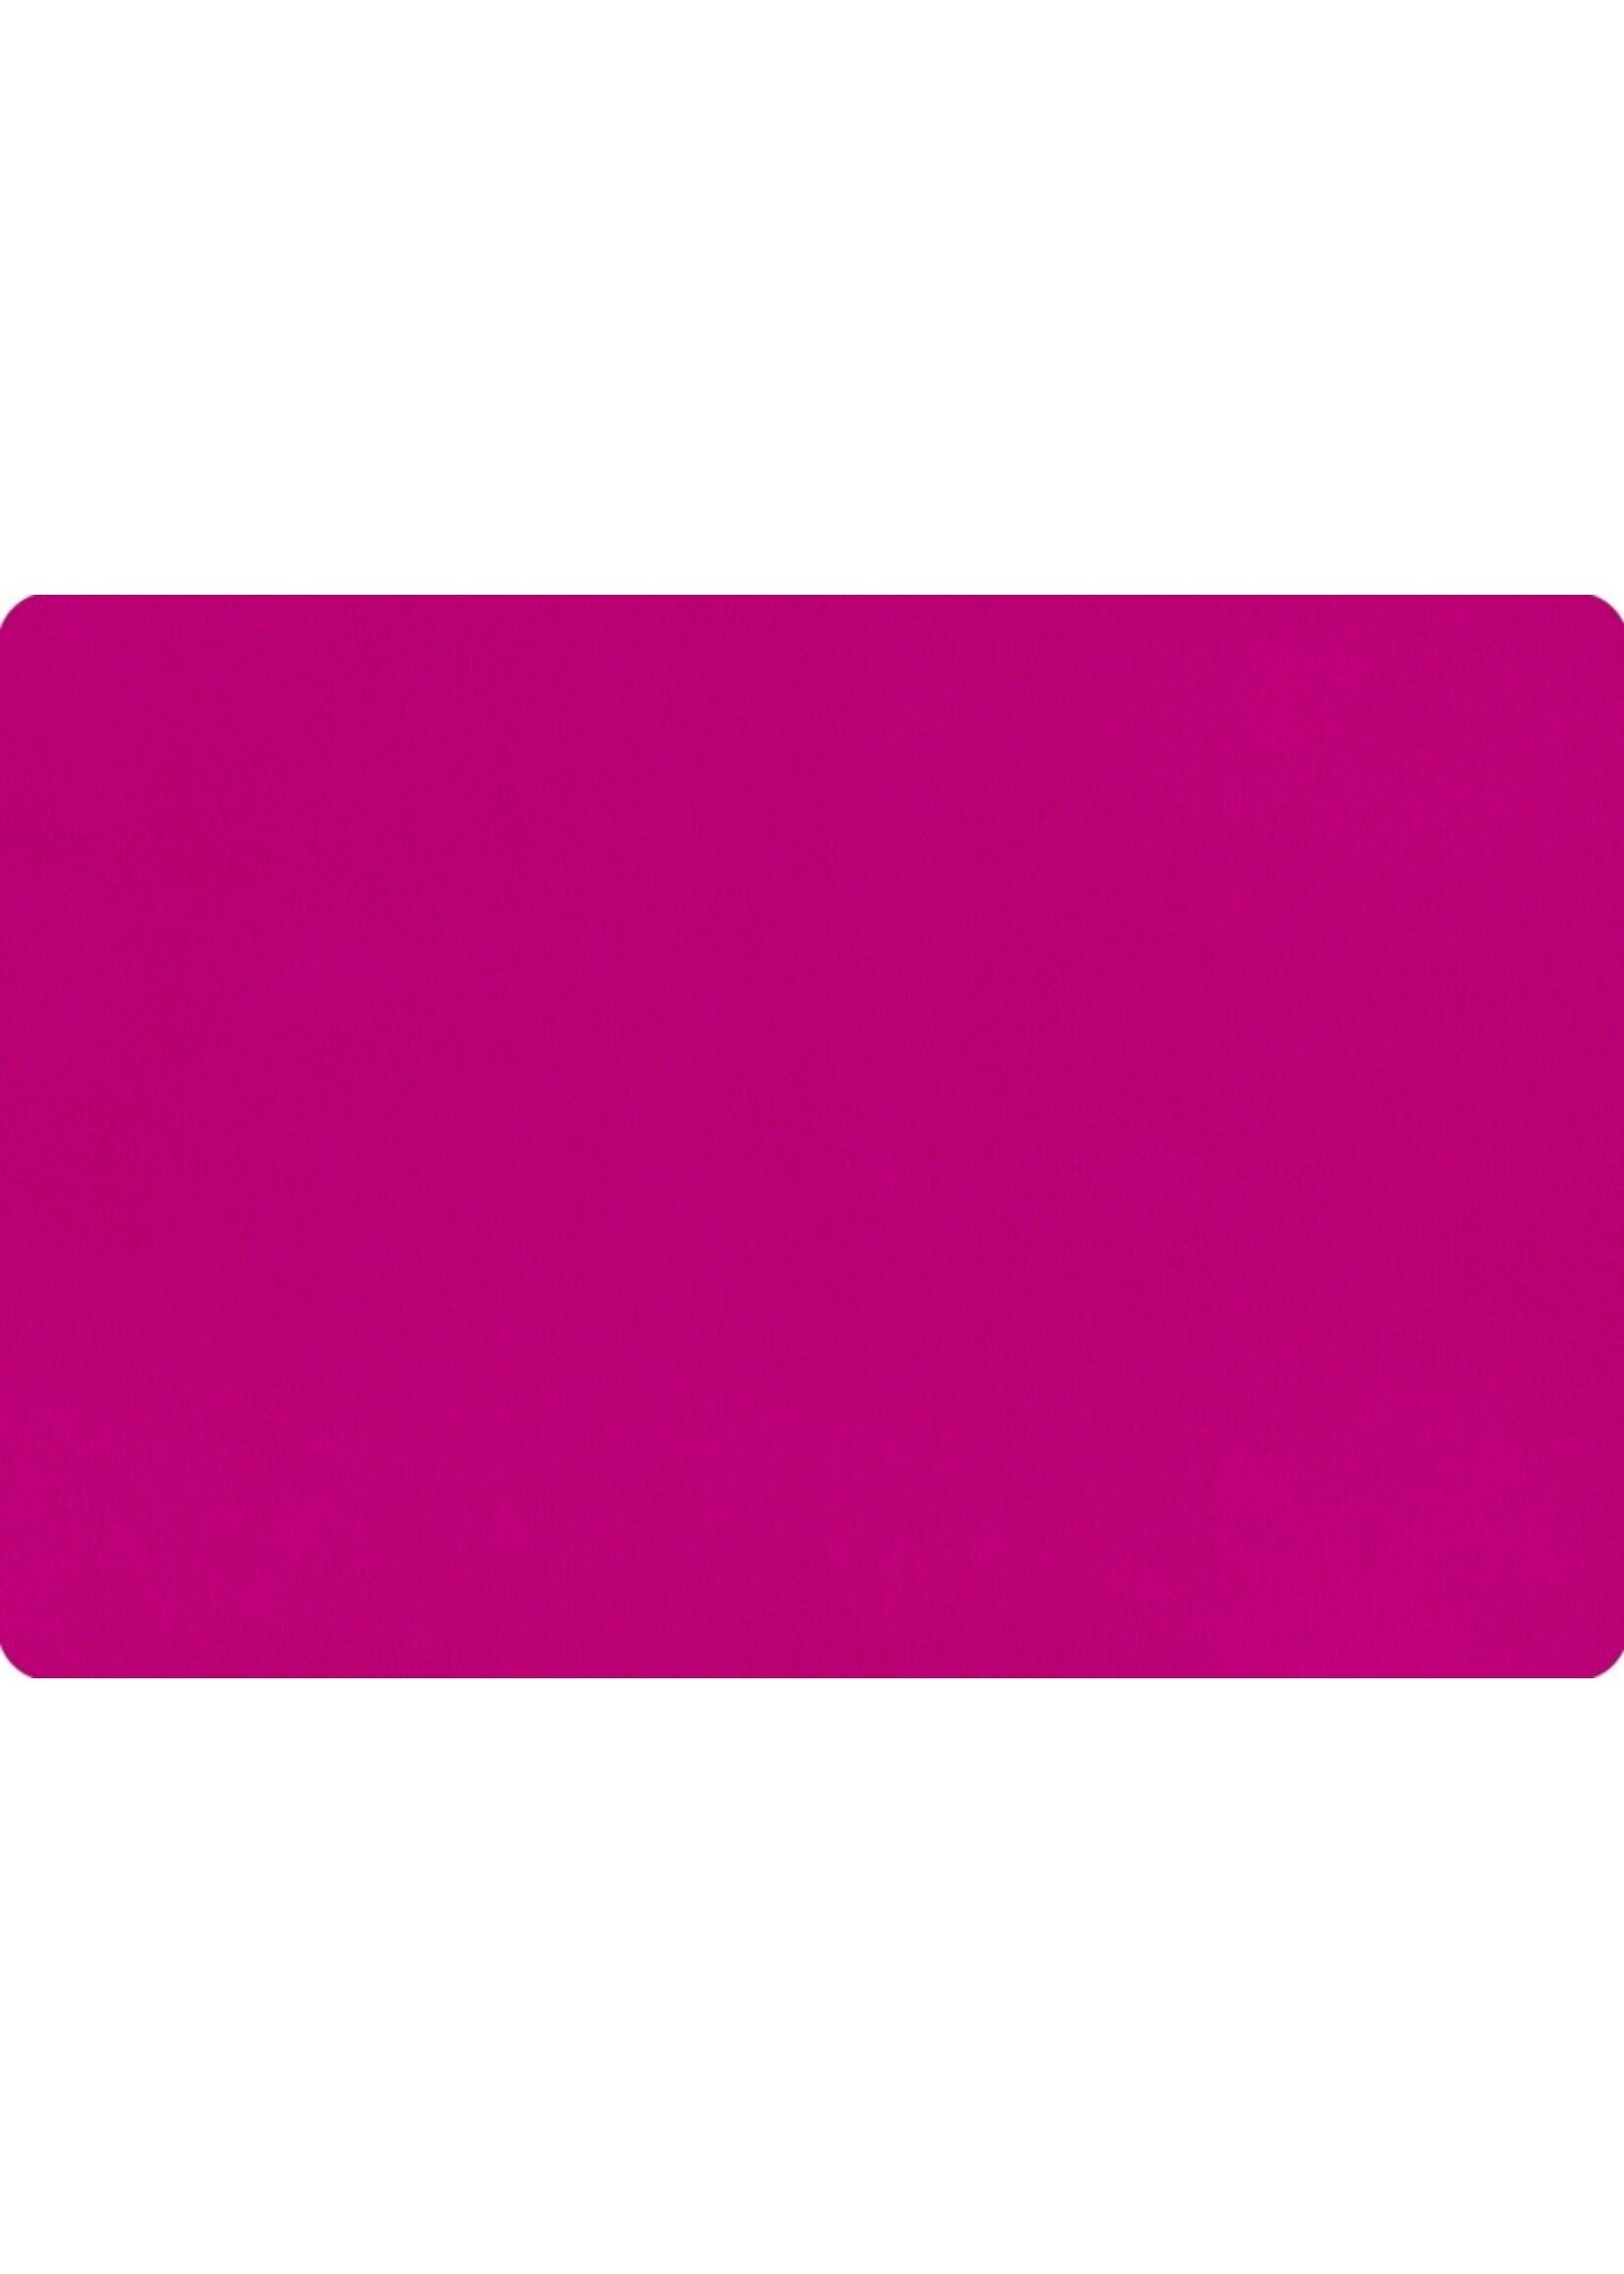 Shannon Fabrics Minky, Cerise Extra Wide Solid Cuddle3, 90", (by the inch)